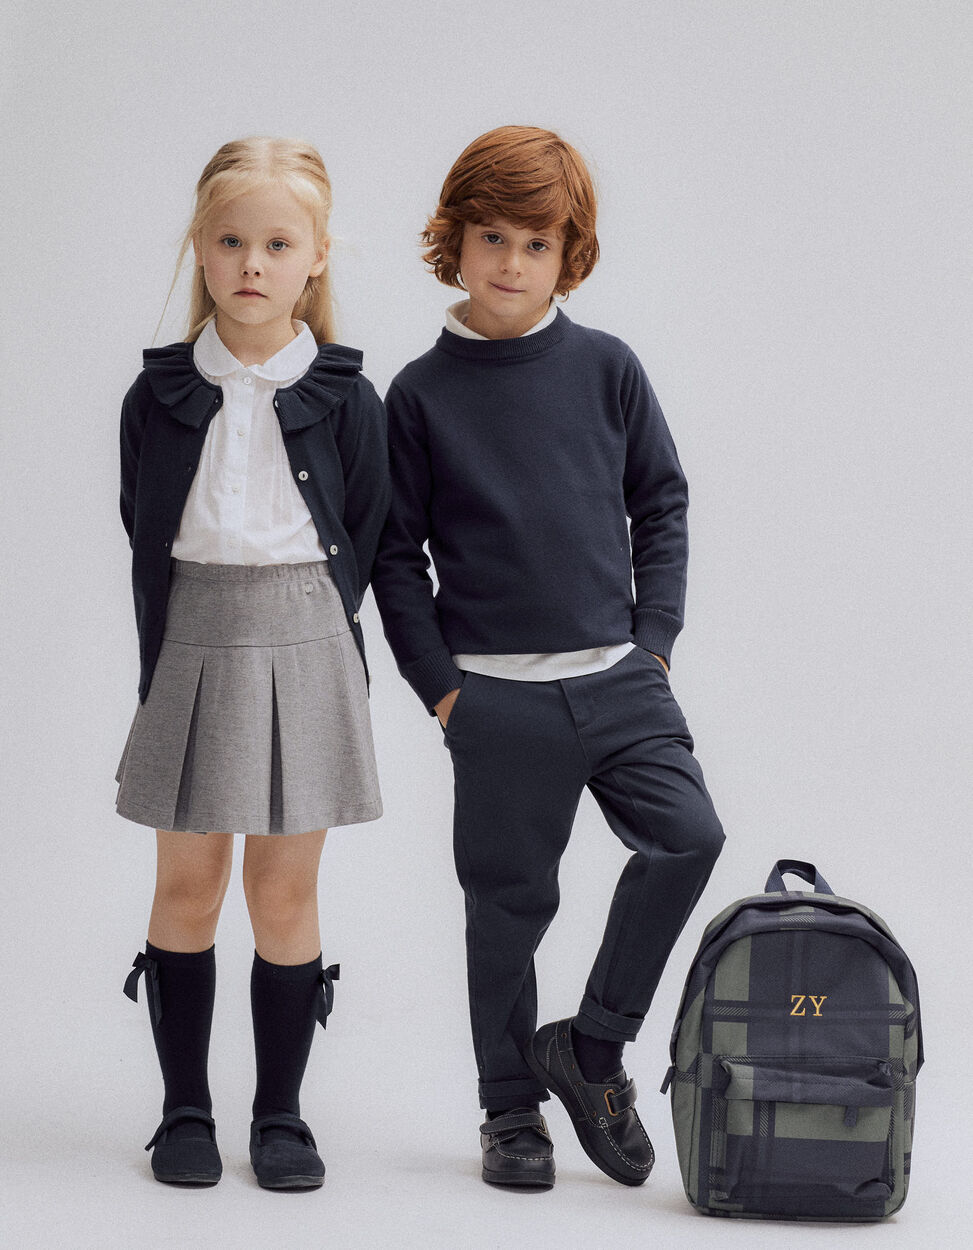 Set of Uniforms for Boys and Girls - Back to School